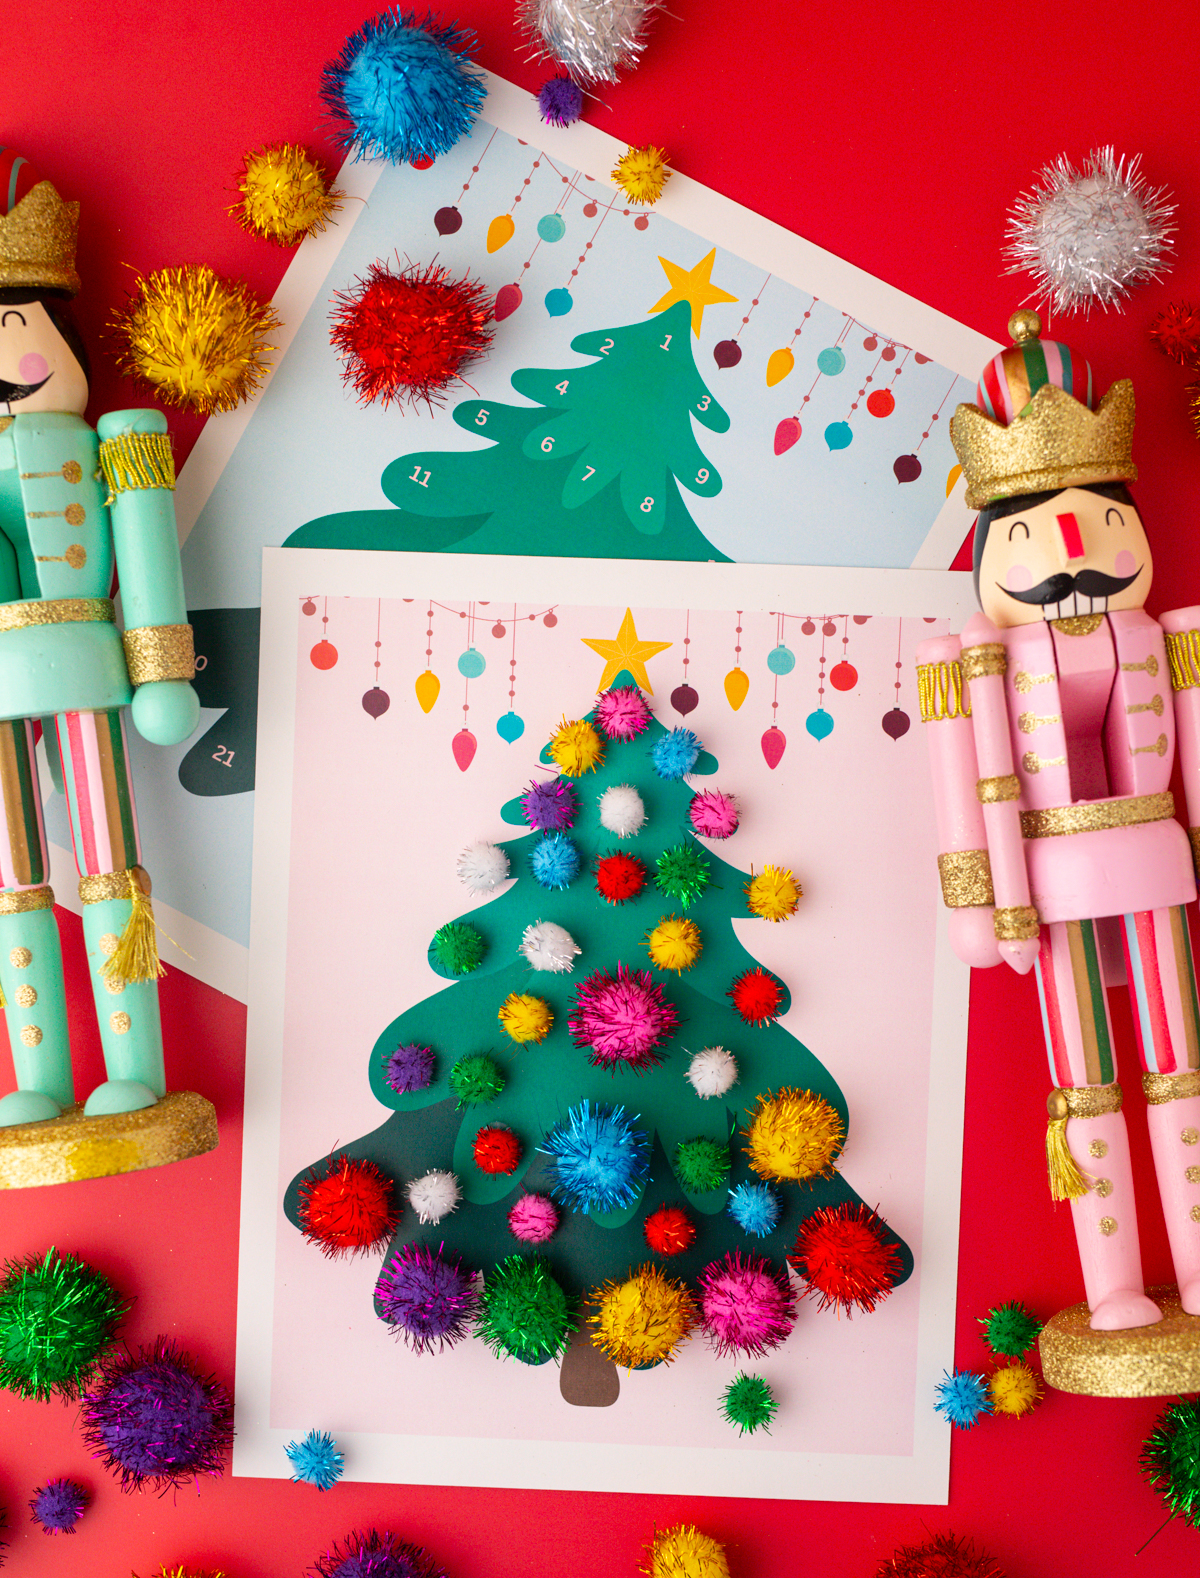 Celebrate the countdown to Christmas with our Christmas Tree Advent Calendar! A delightful free printable that adds festive joy to your daily countdown.